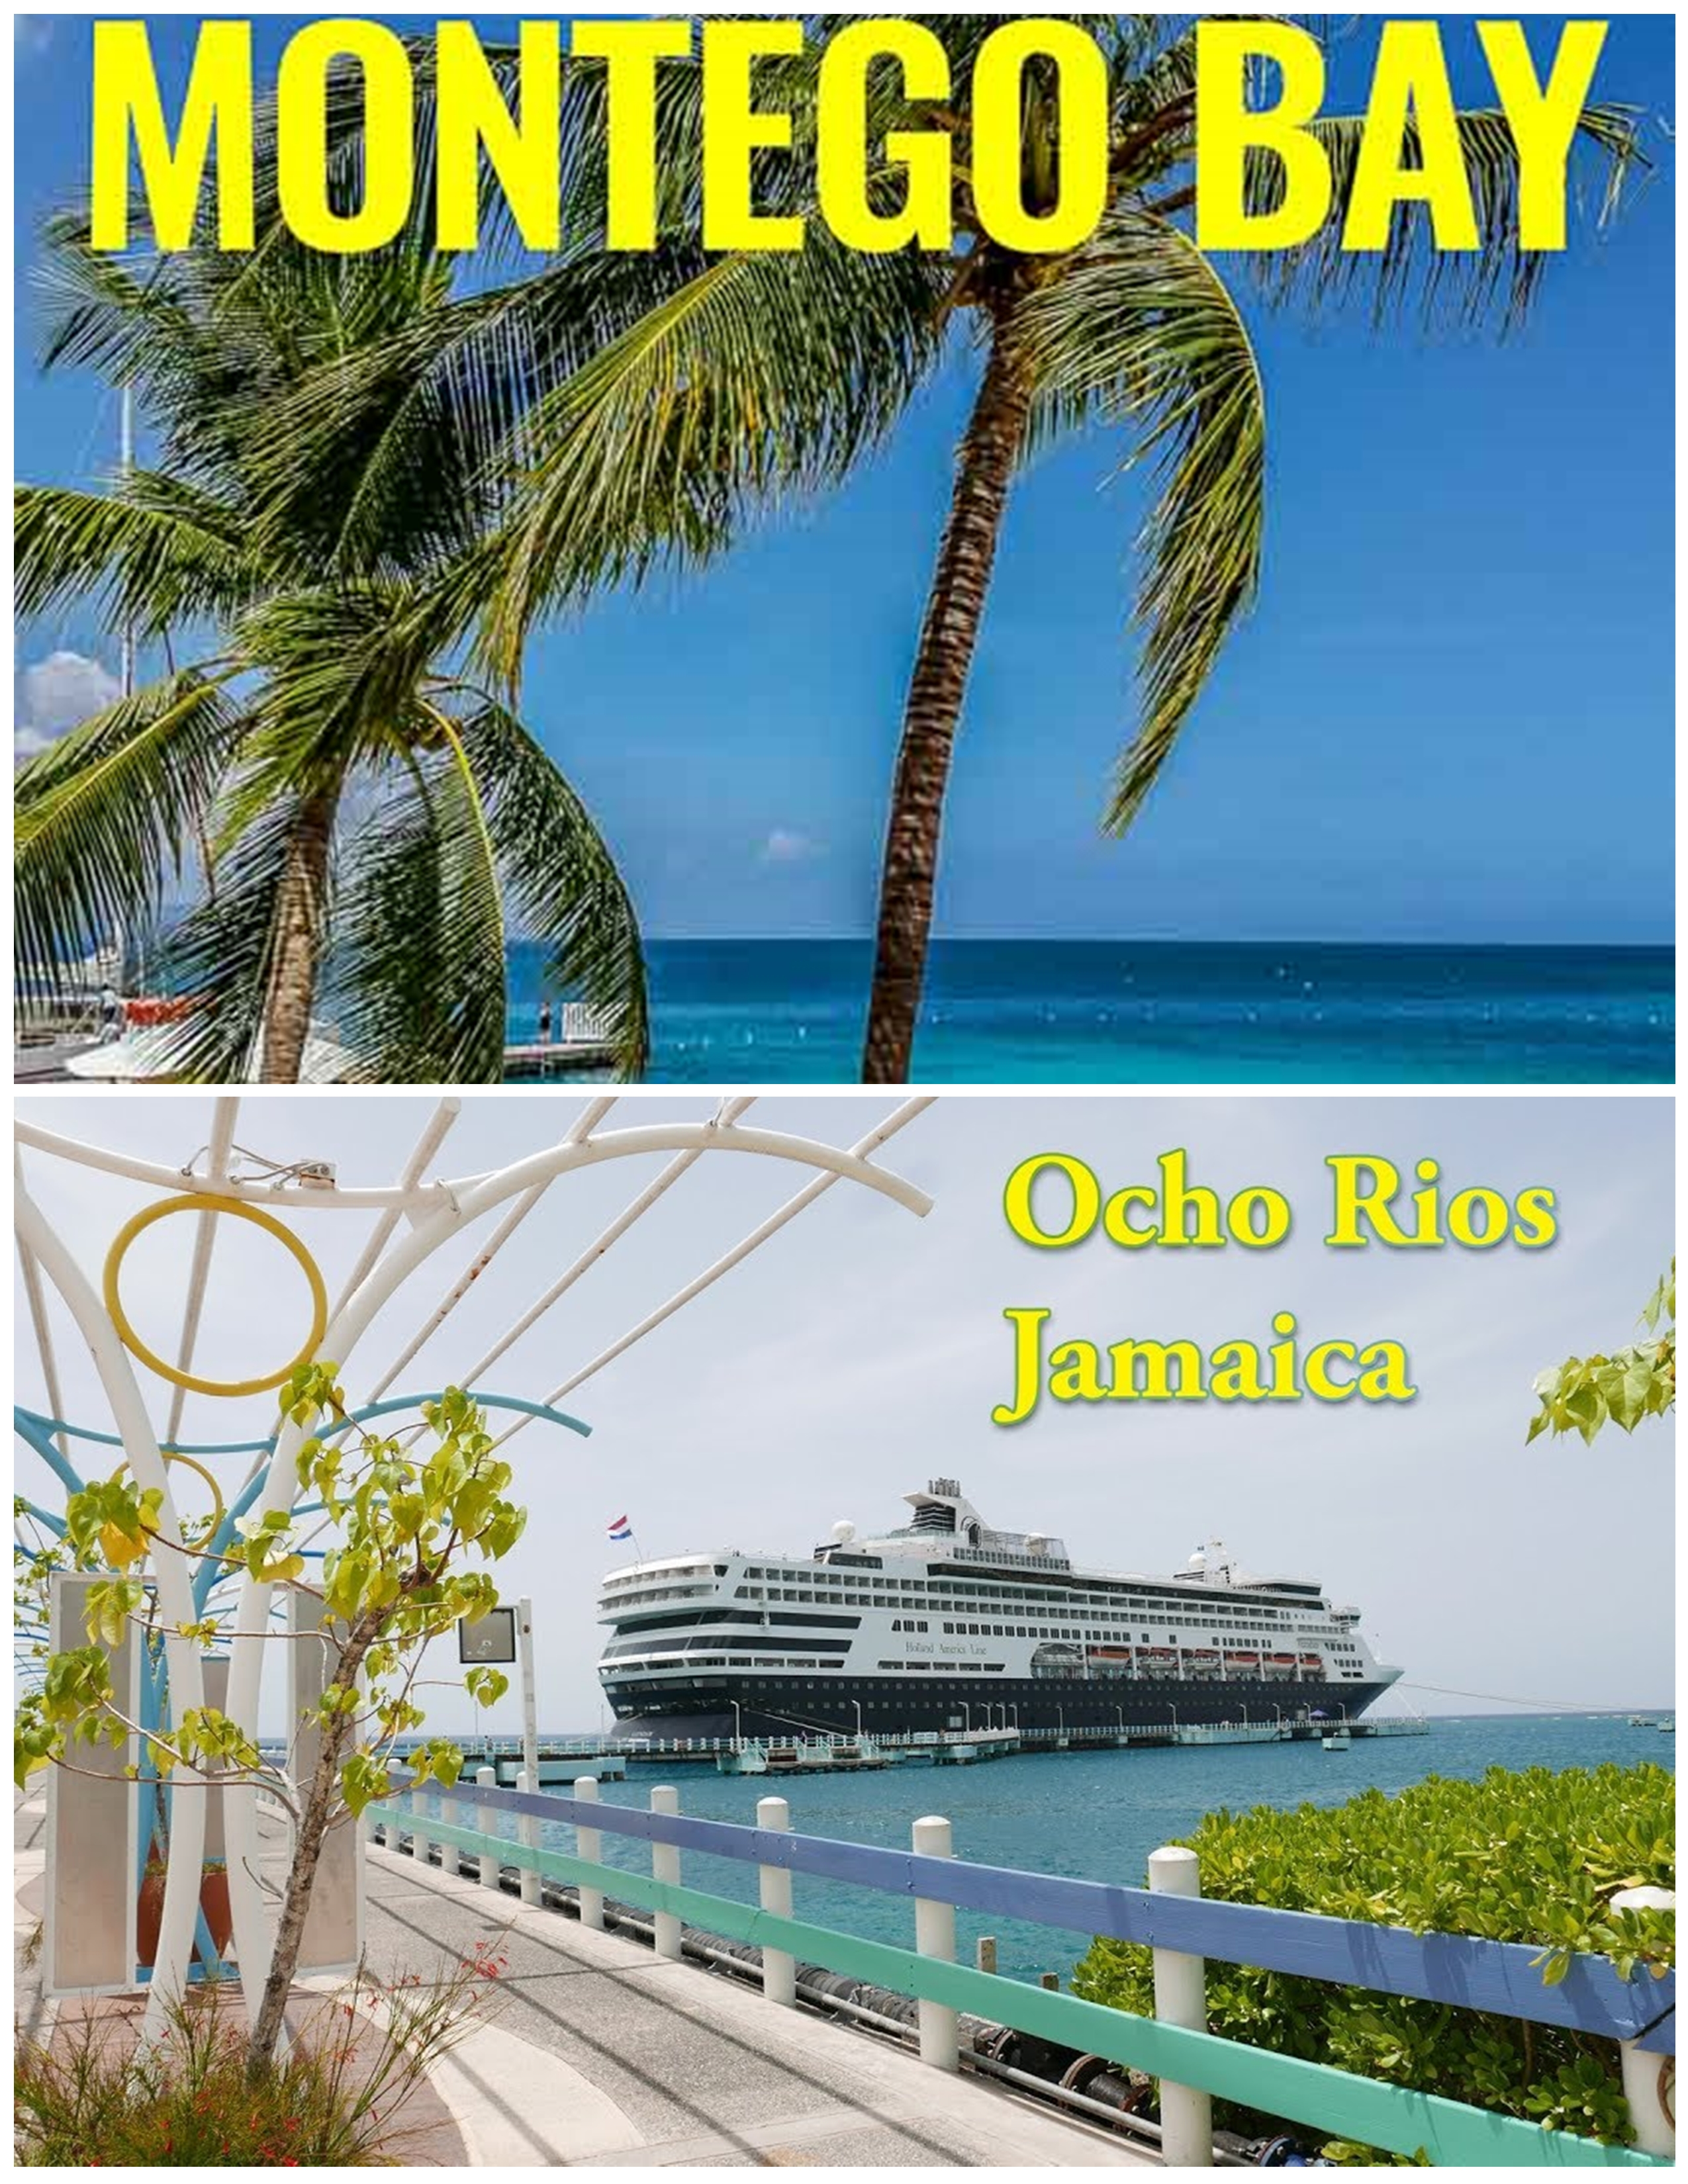 From Montego bay Hotels on North Course Highway Area - Cruise Ship Pier ( Round Trip)